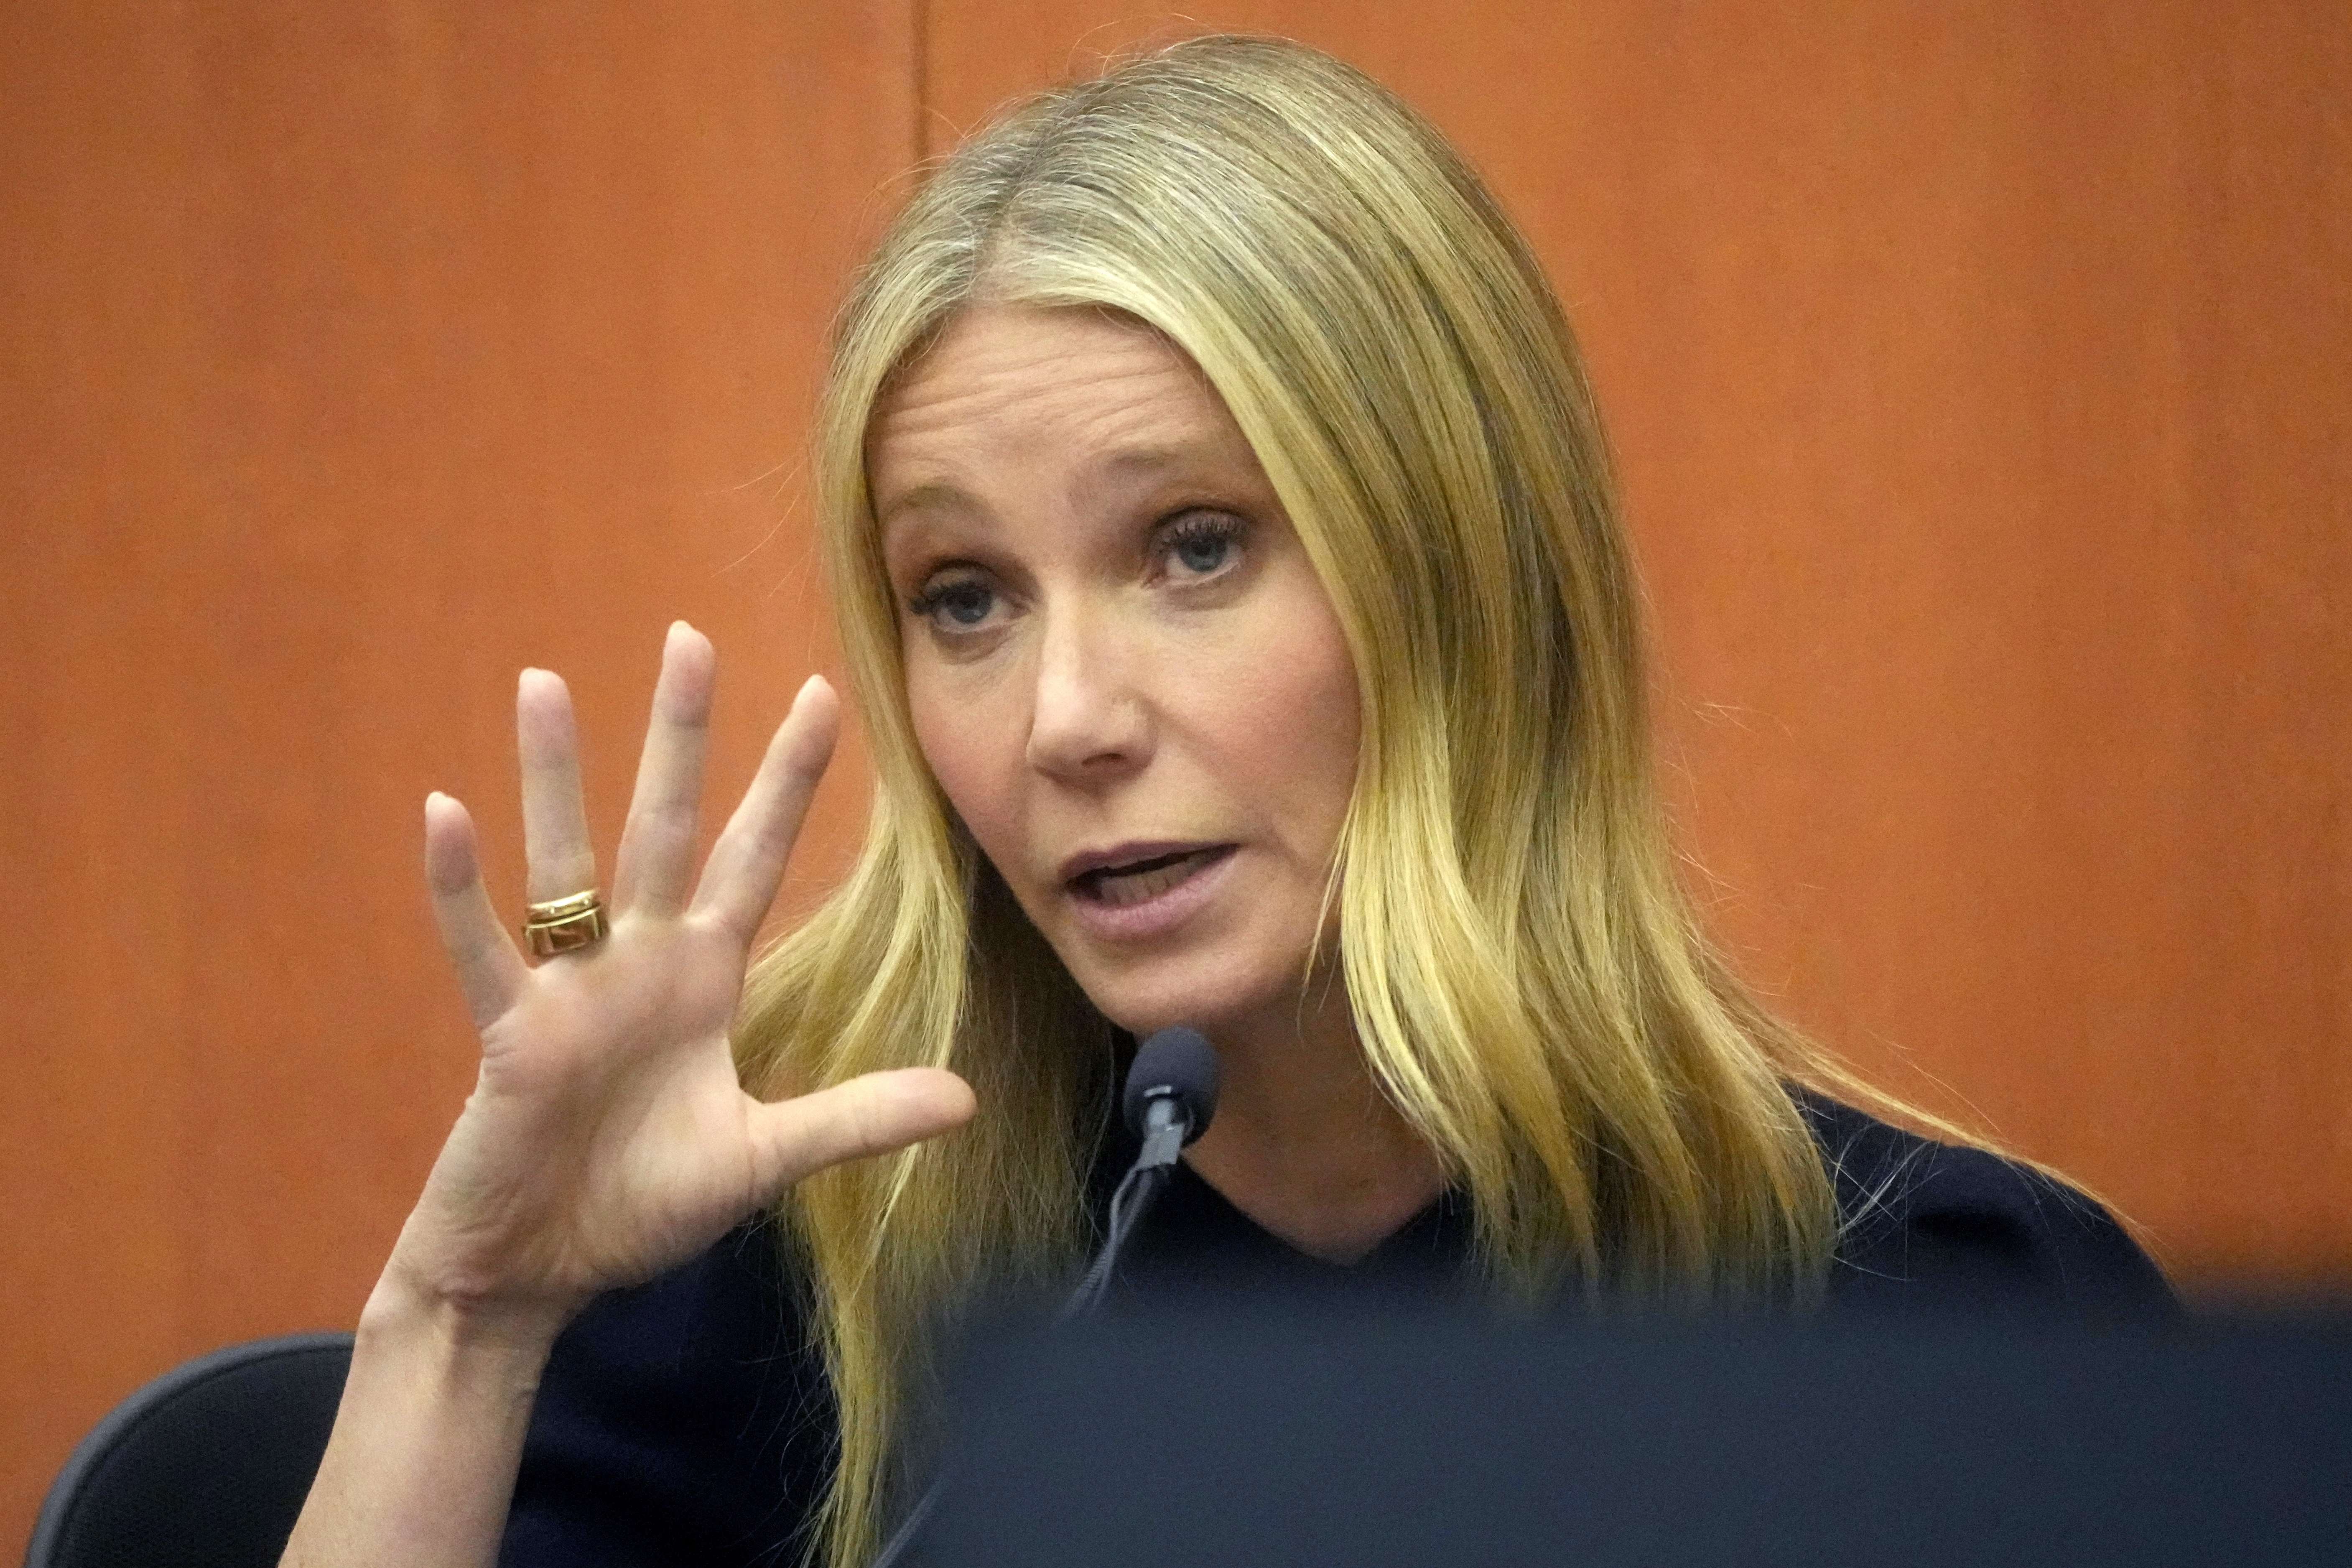 Gwyneth Paltrow appears on the stand in court where she is accused in a lawsuit of crashing into a skier during a 2016 family ski vacation, leaving him with brain damage and four broken ribs, in Park City, Utah, U.S., March 24, 2023. (EPA Photo)